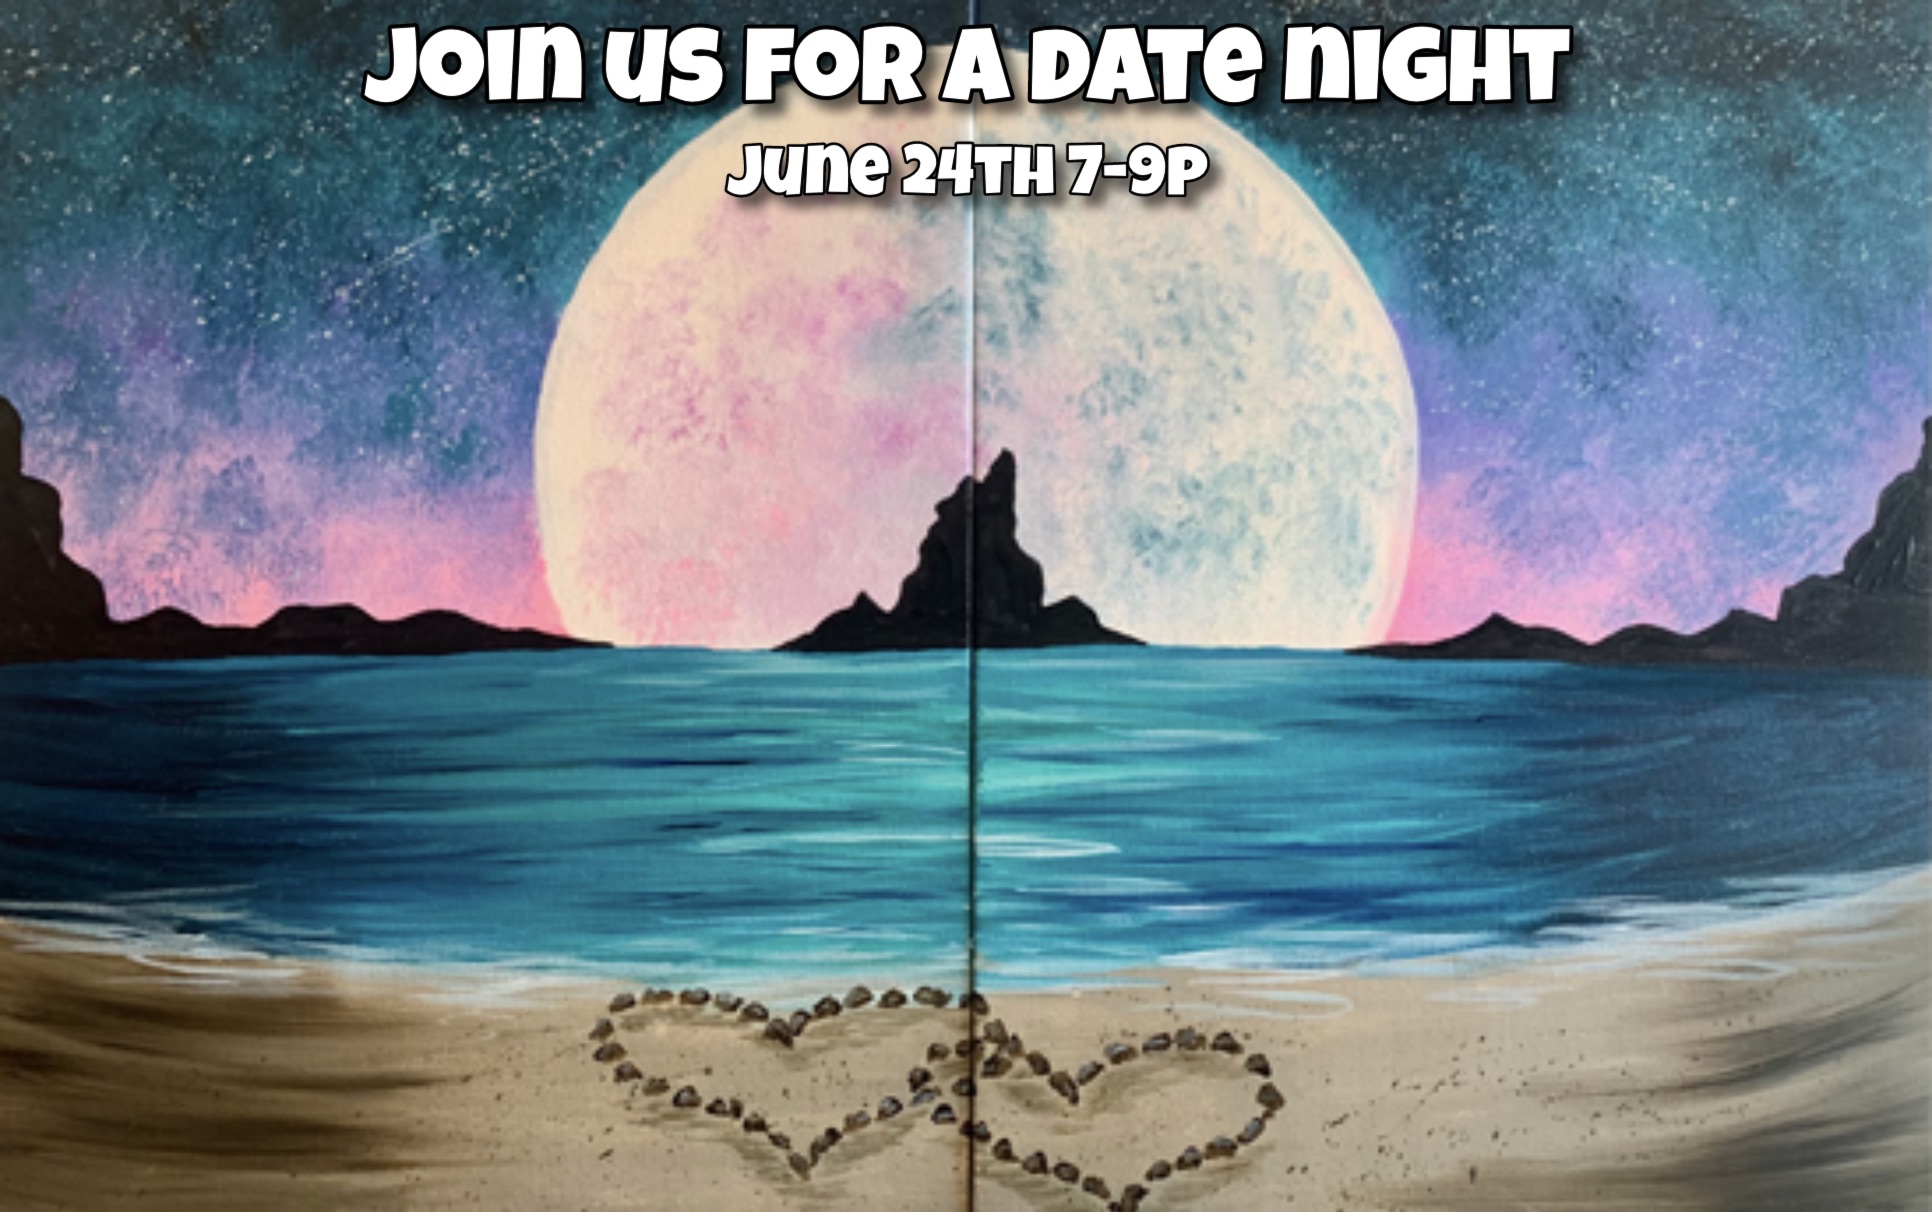 Date Night at Pinot's Palette